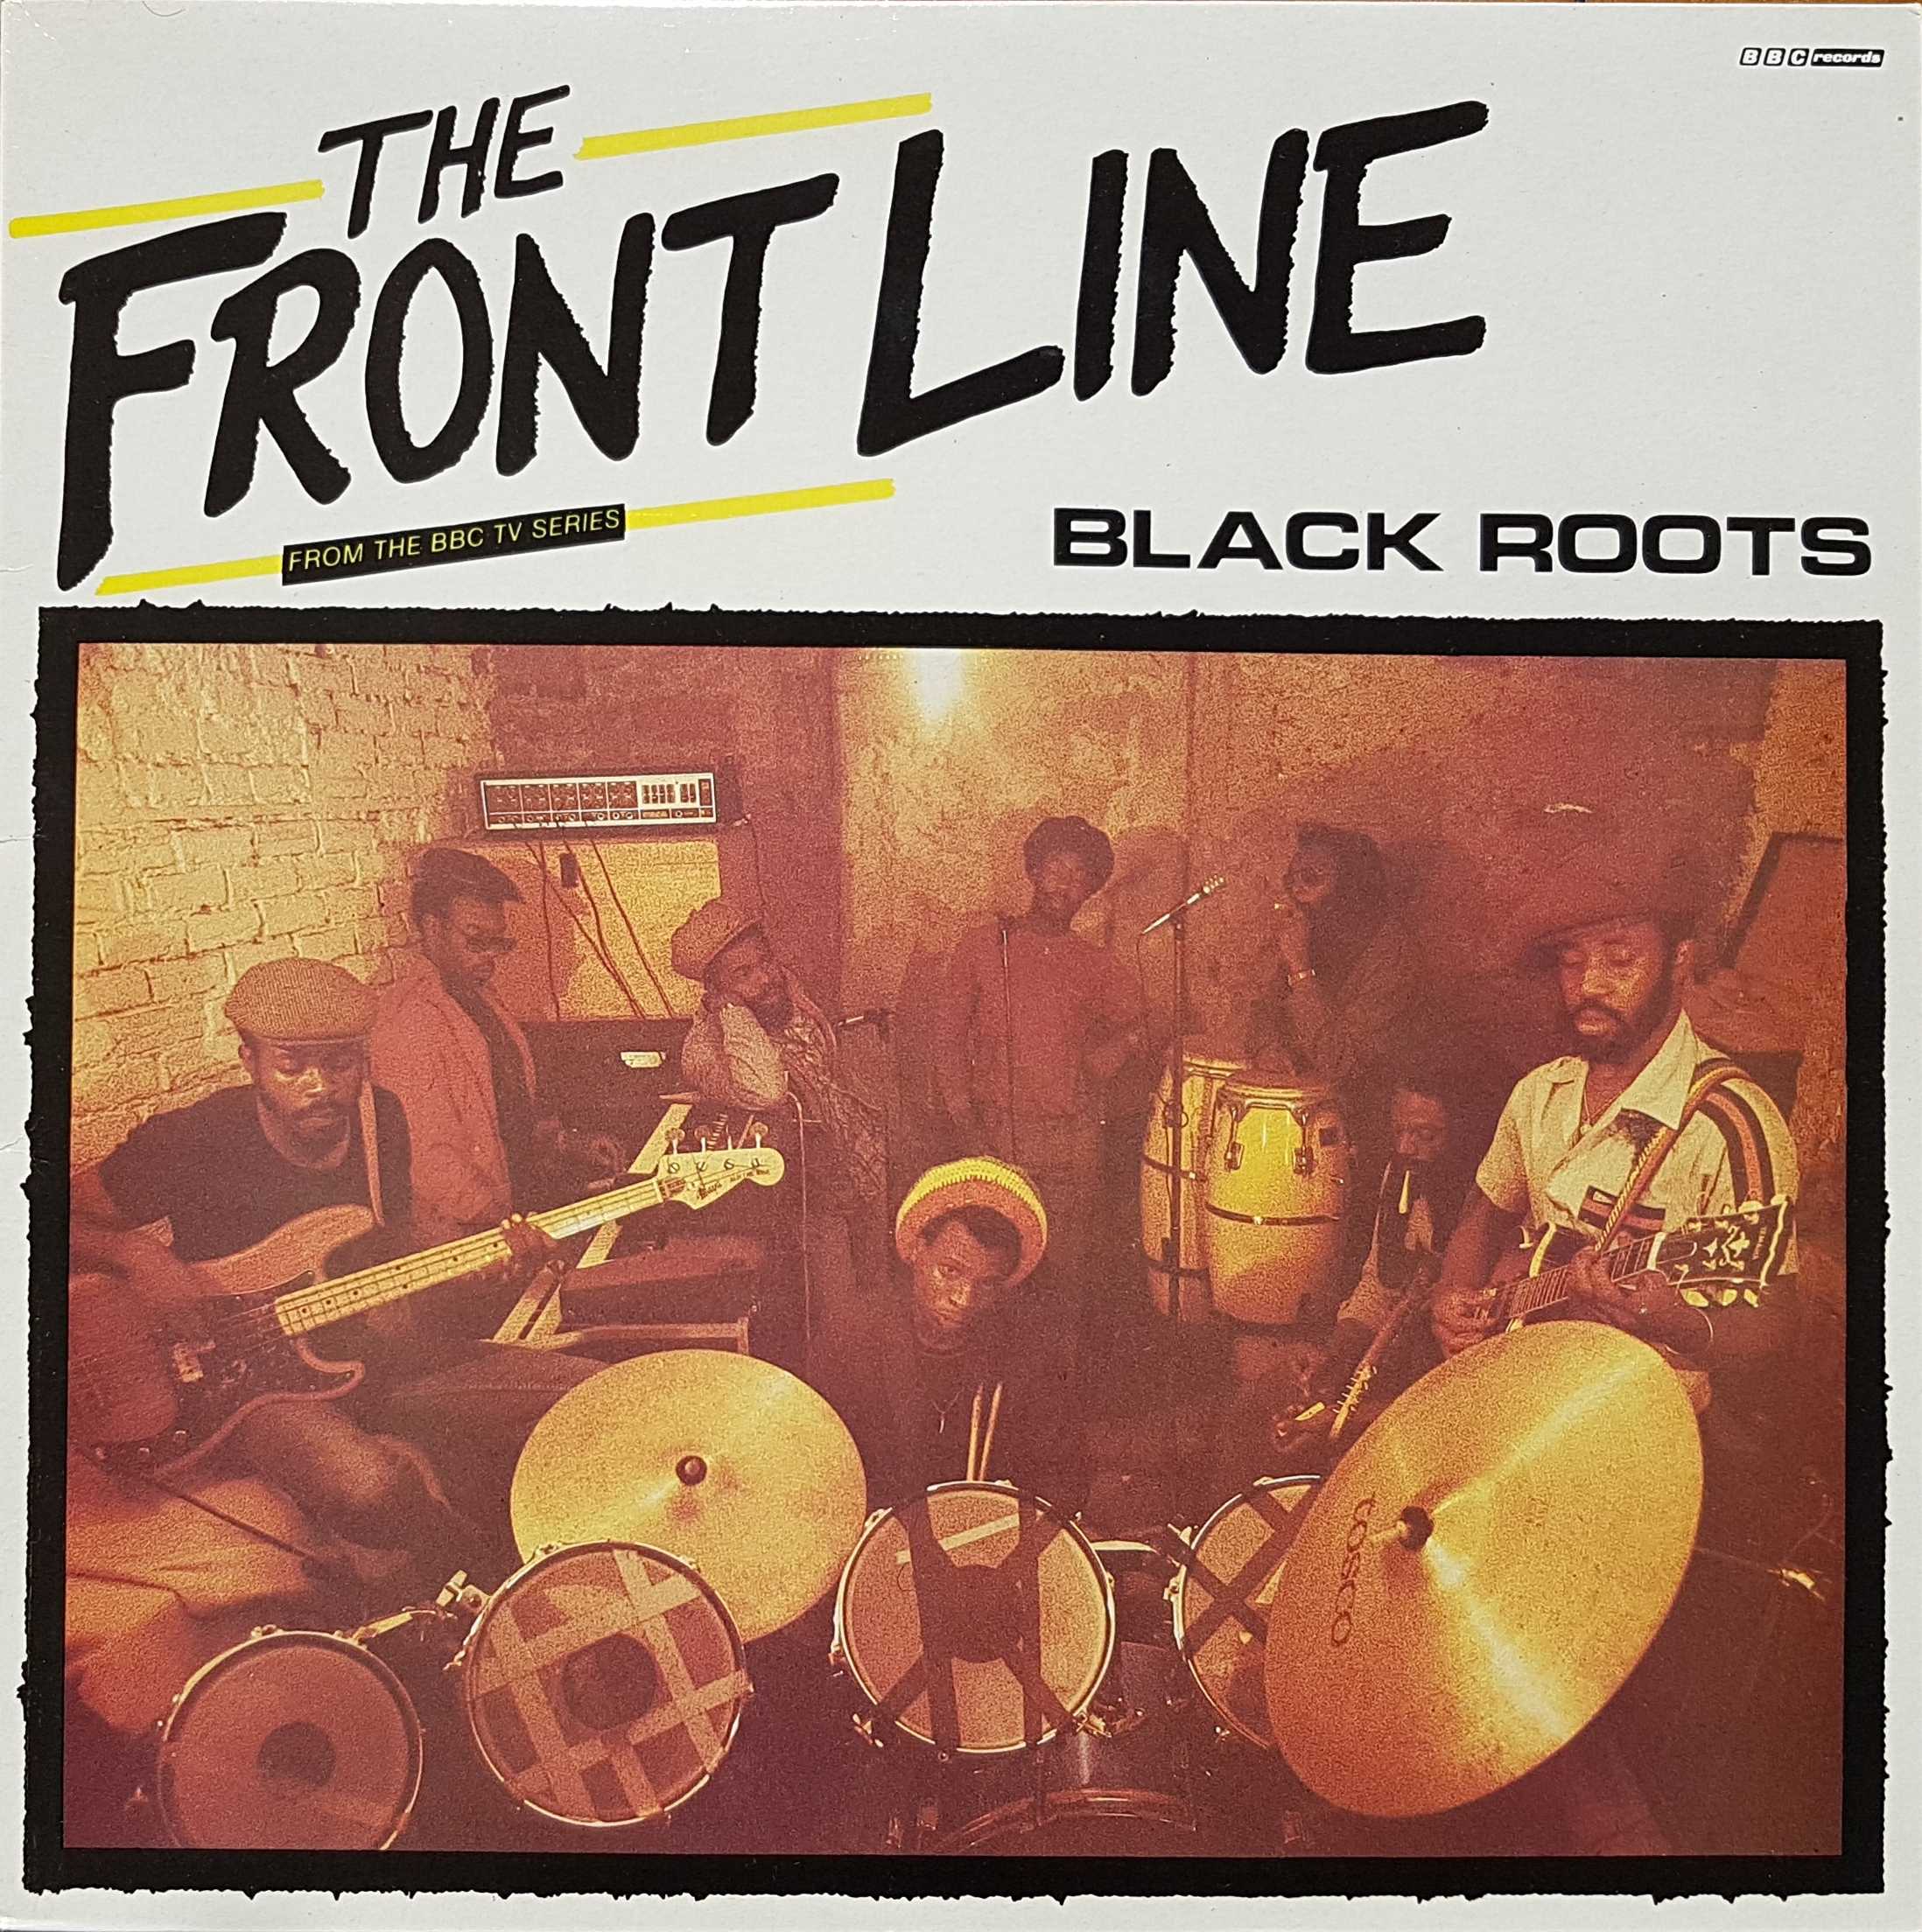 Picture of REC 555 The front line - Black Roots by artist Black Roots from the BBC albums - Records and Tapes library